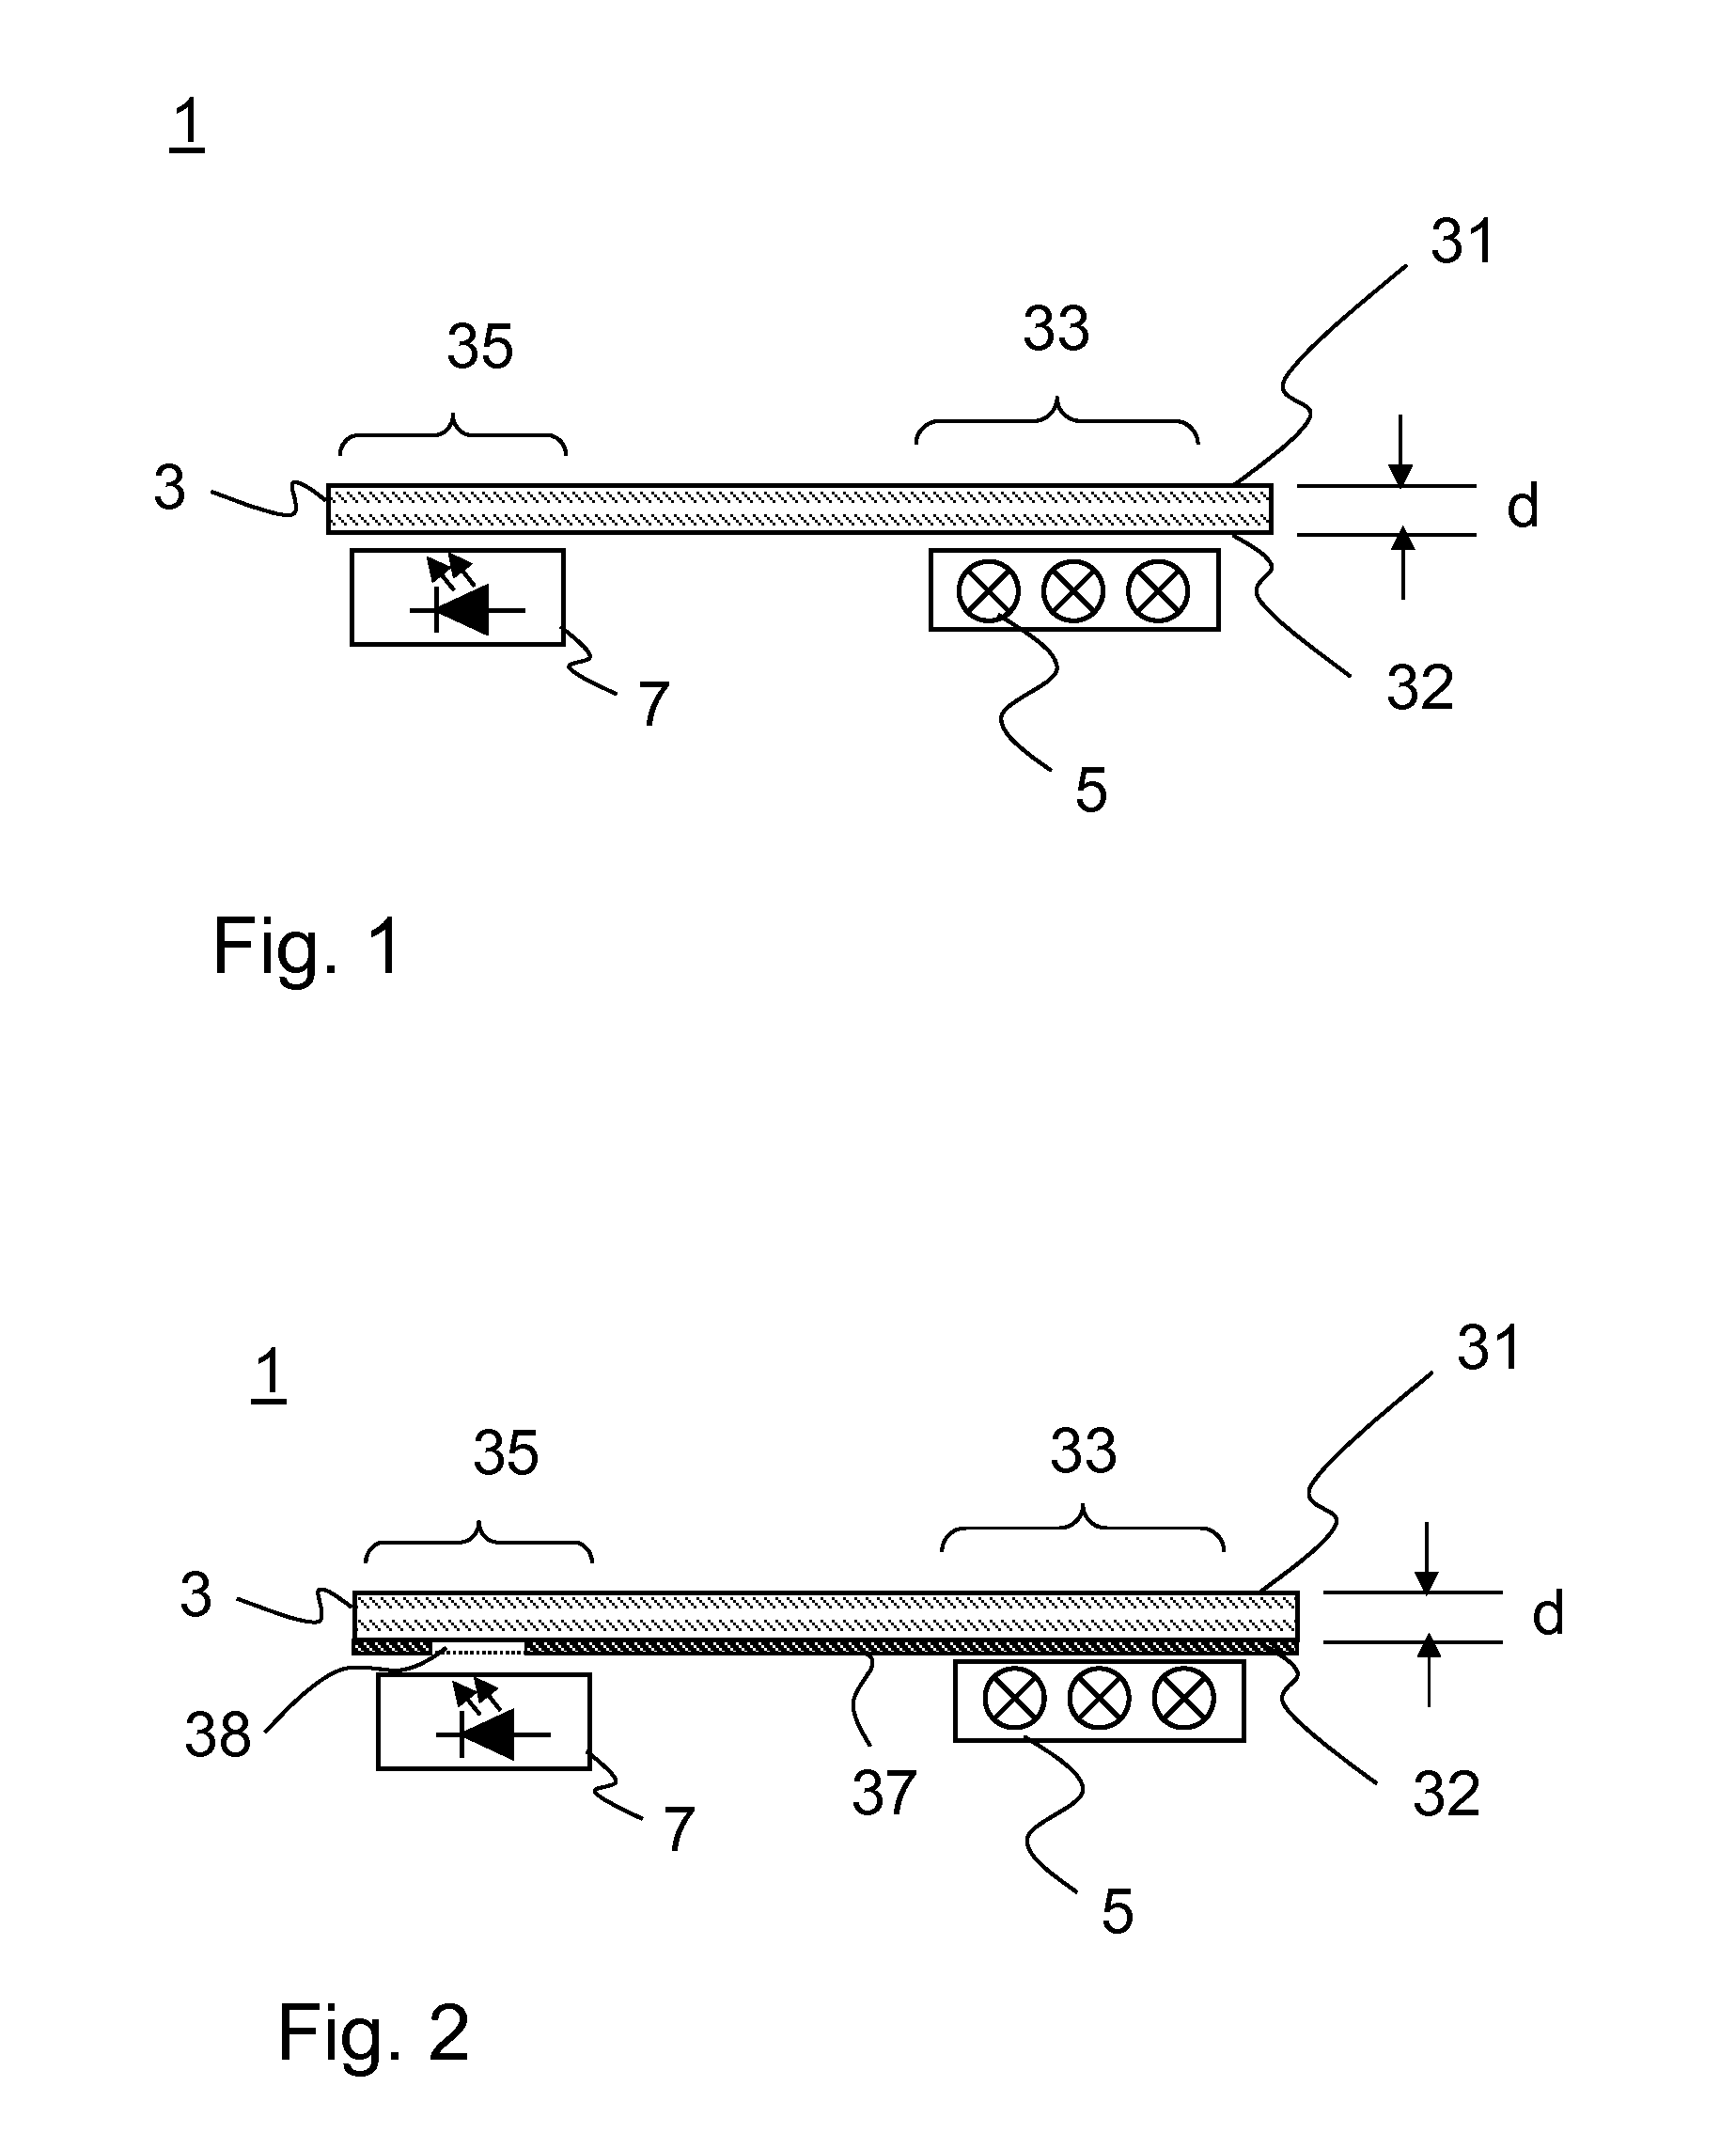 Method for producing a glass ceramic with a predefined transmittance